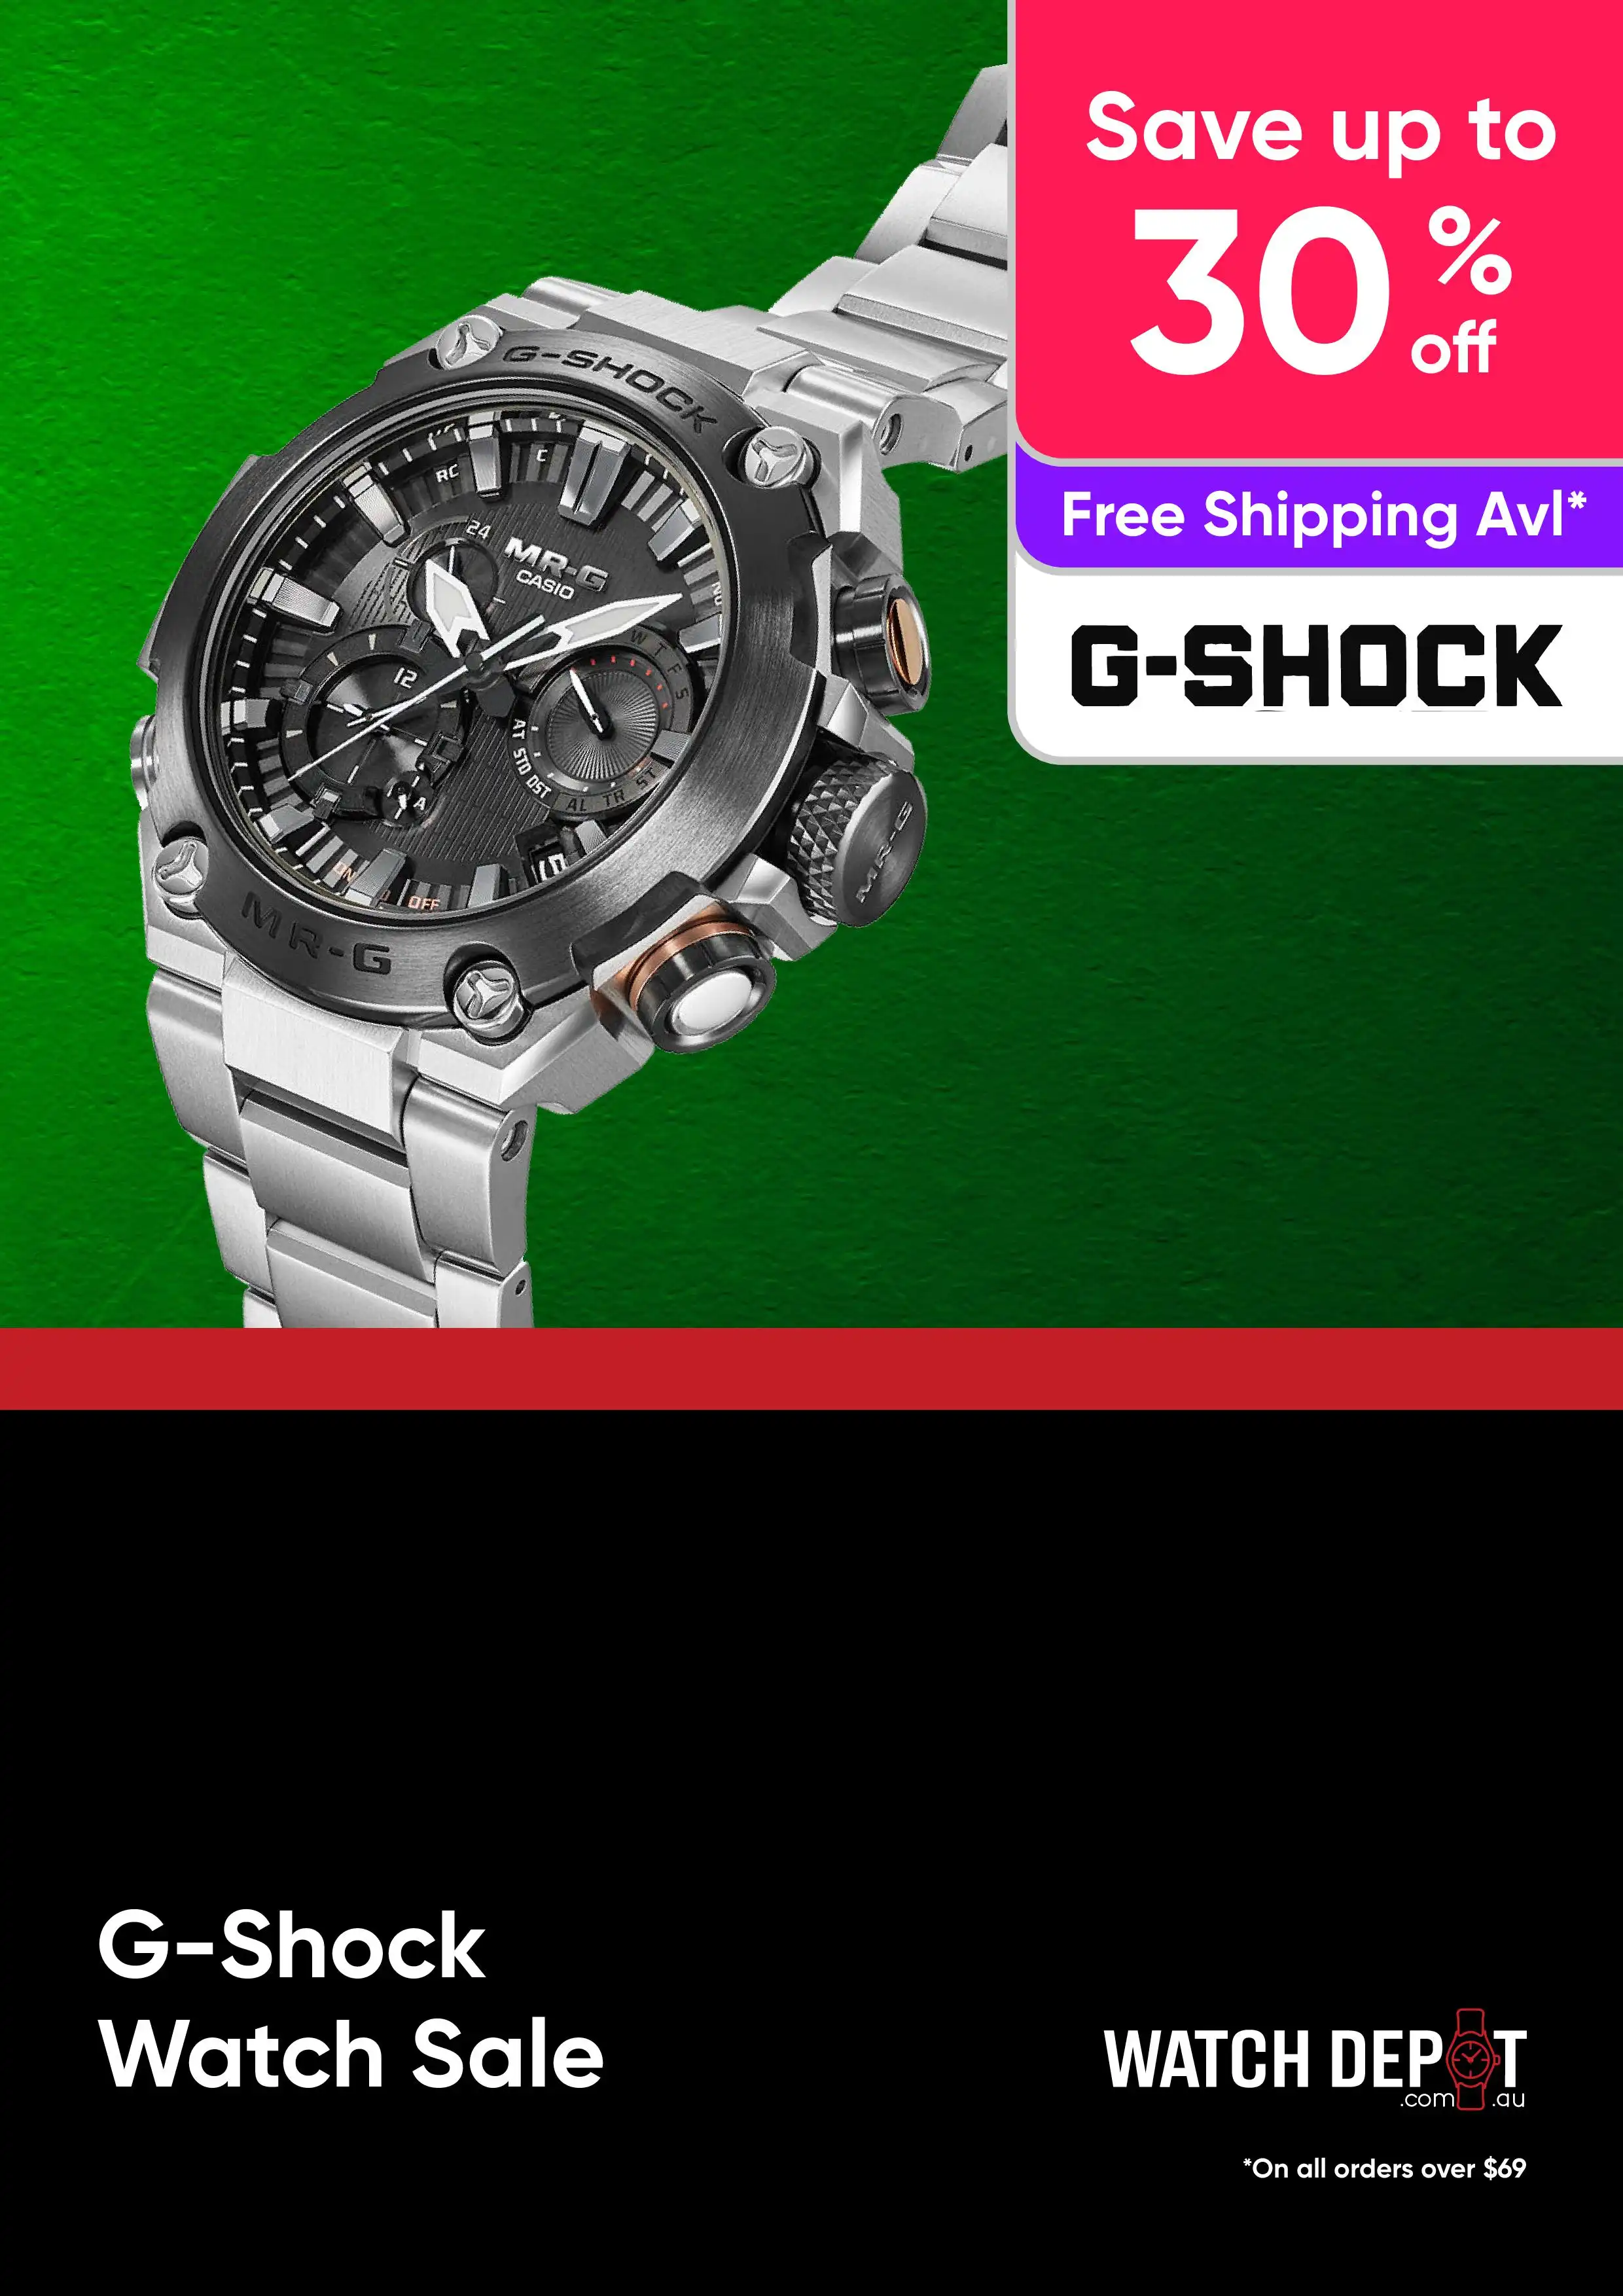 Men's and Women's - G-Shock Watch Sale - Up to 30% off